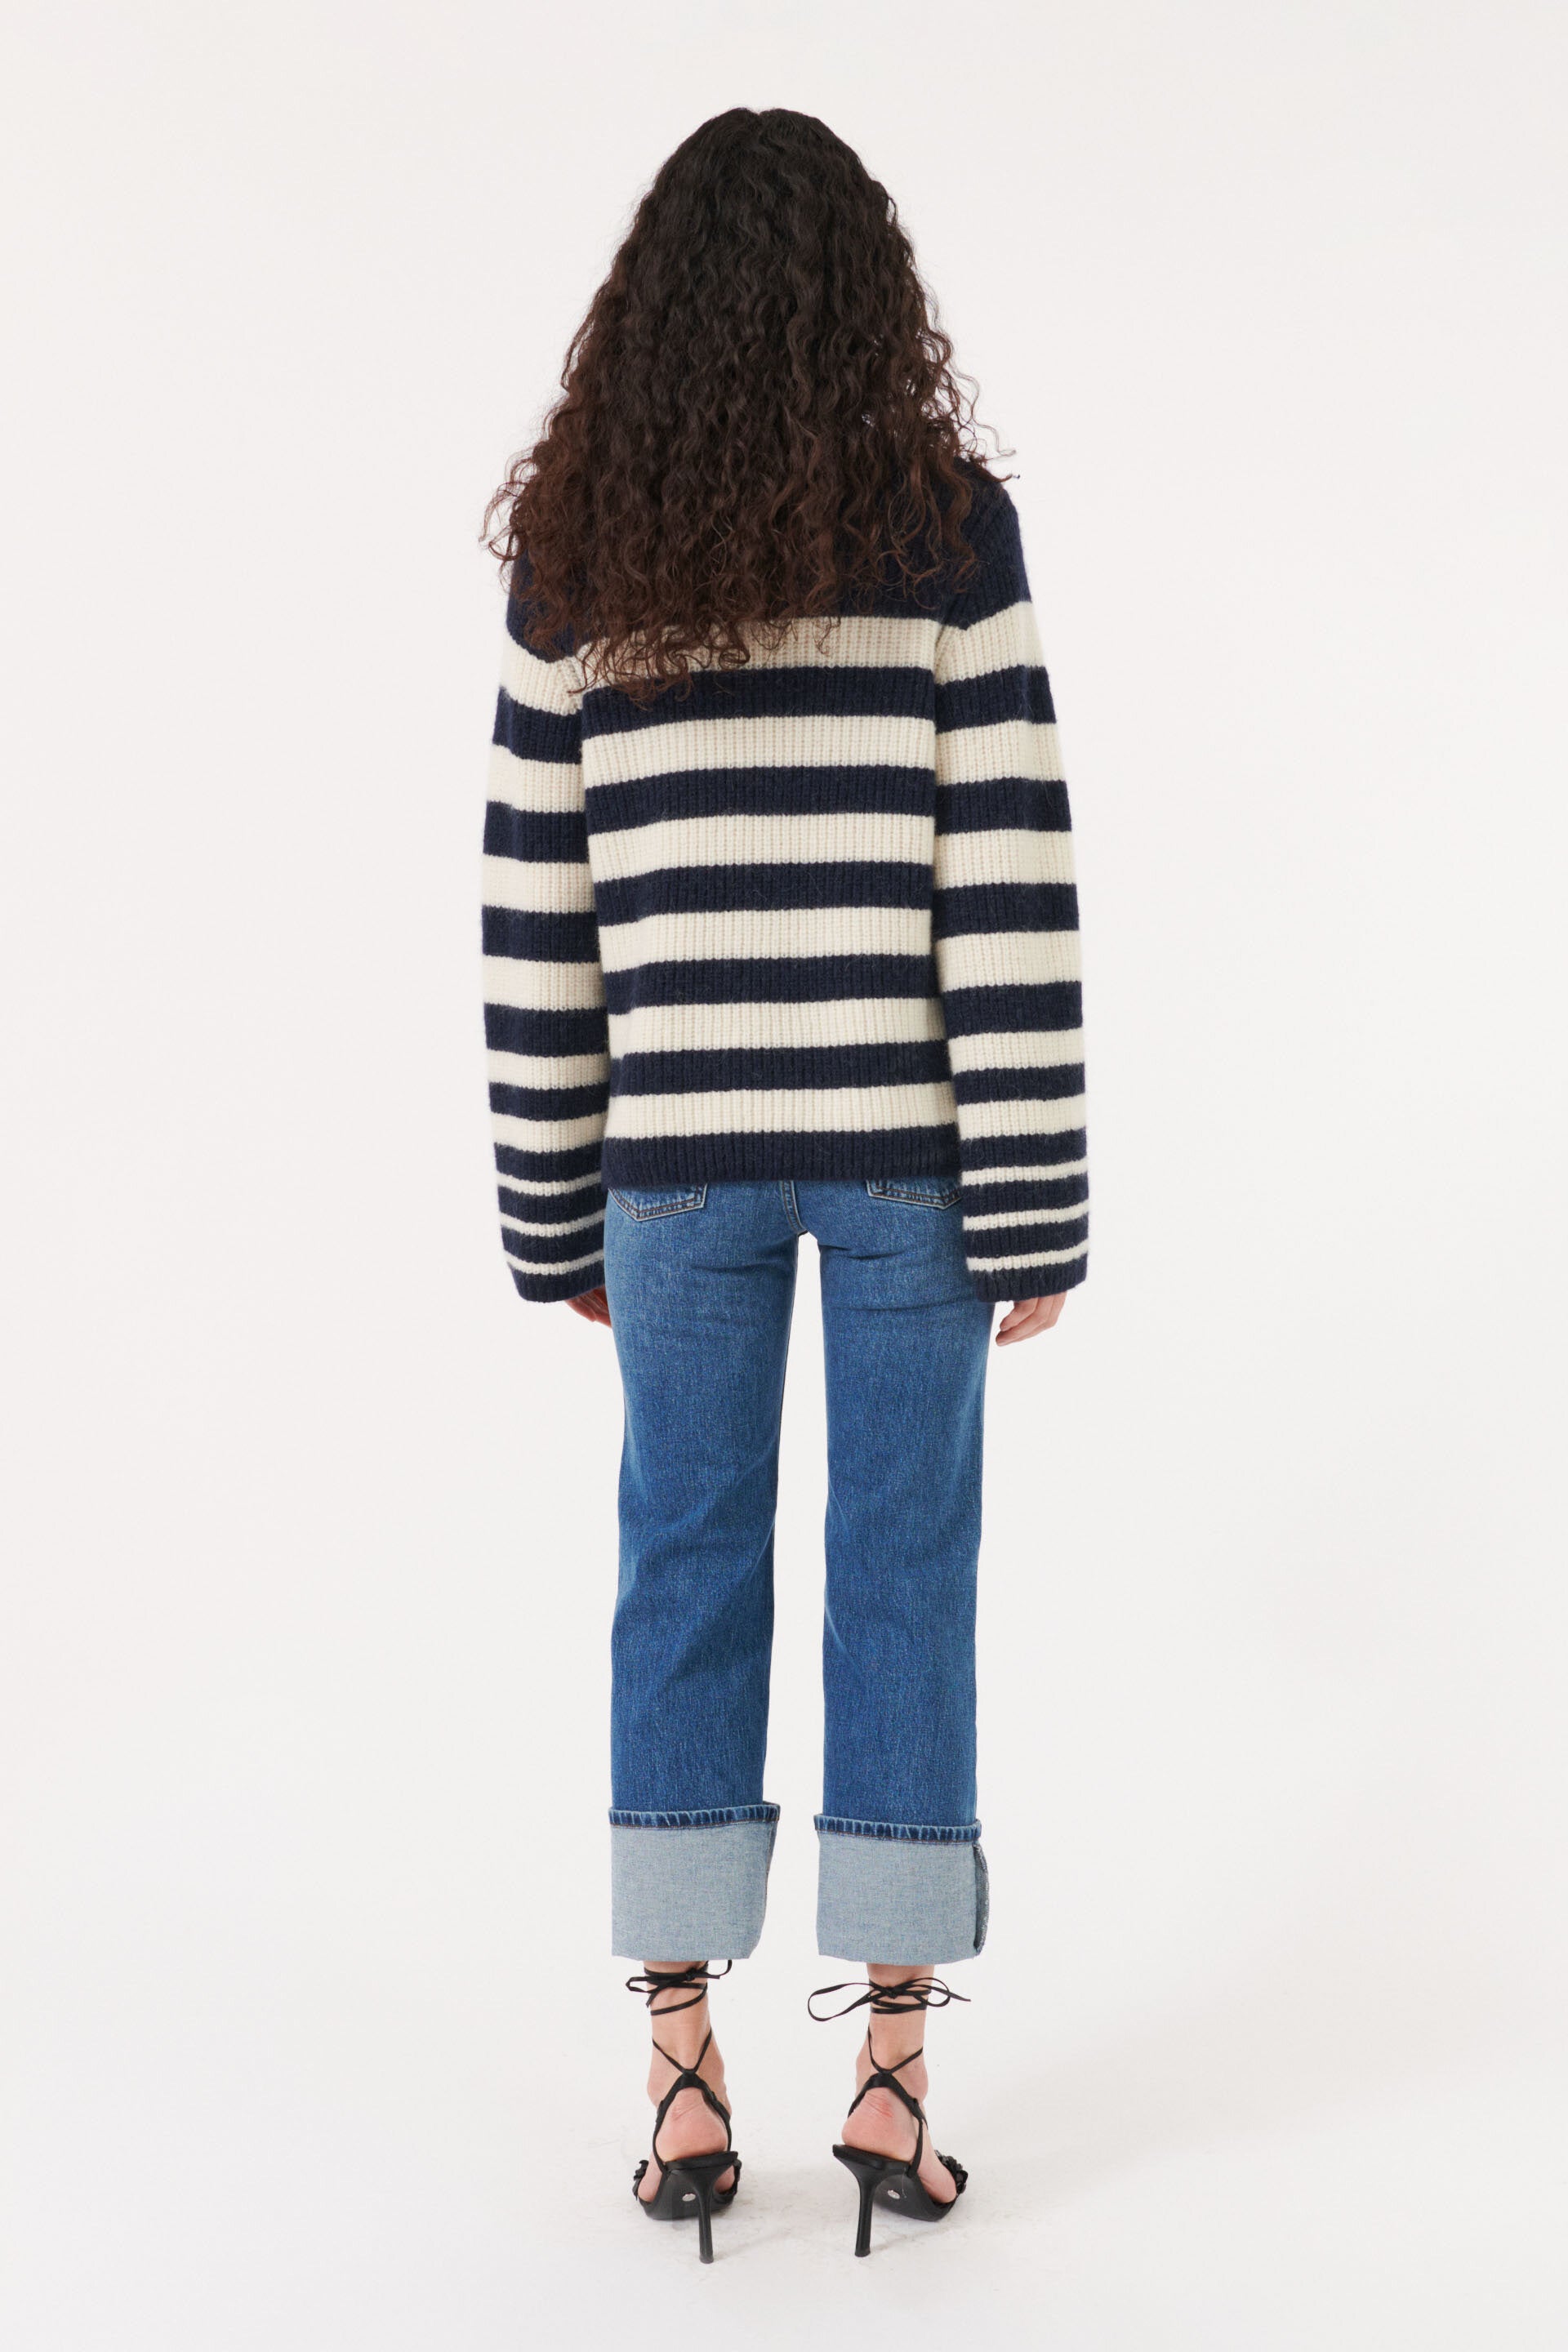 Chikita Sweater - Babs The Label